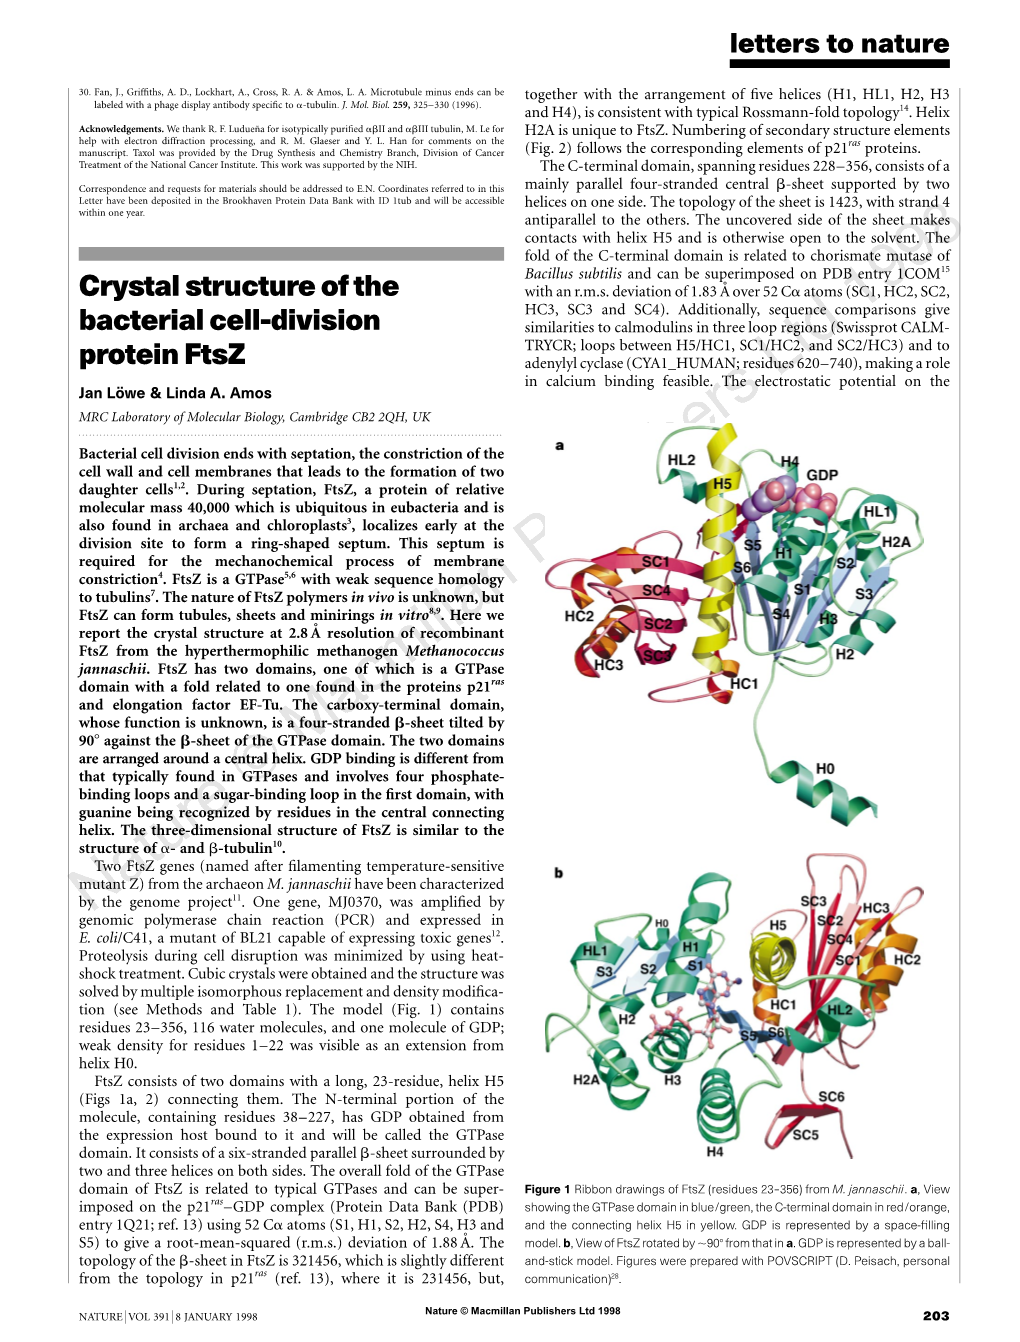 "Crystal Structure of the Bacterial Cell-Division Protein Ftsz", Nature